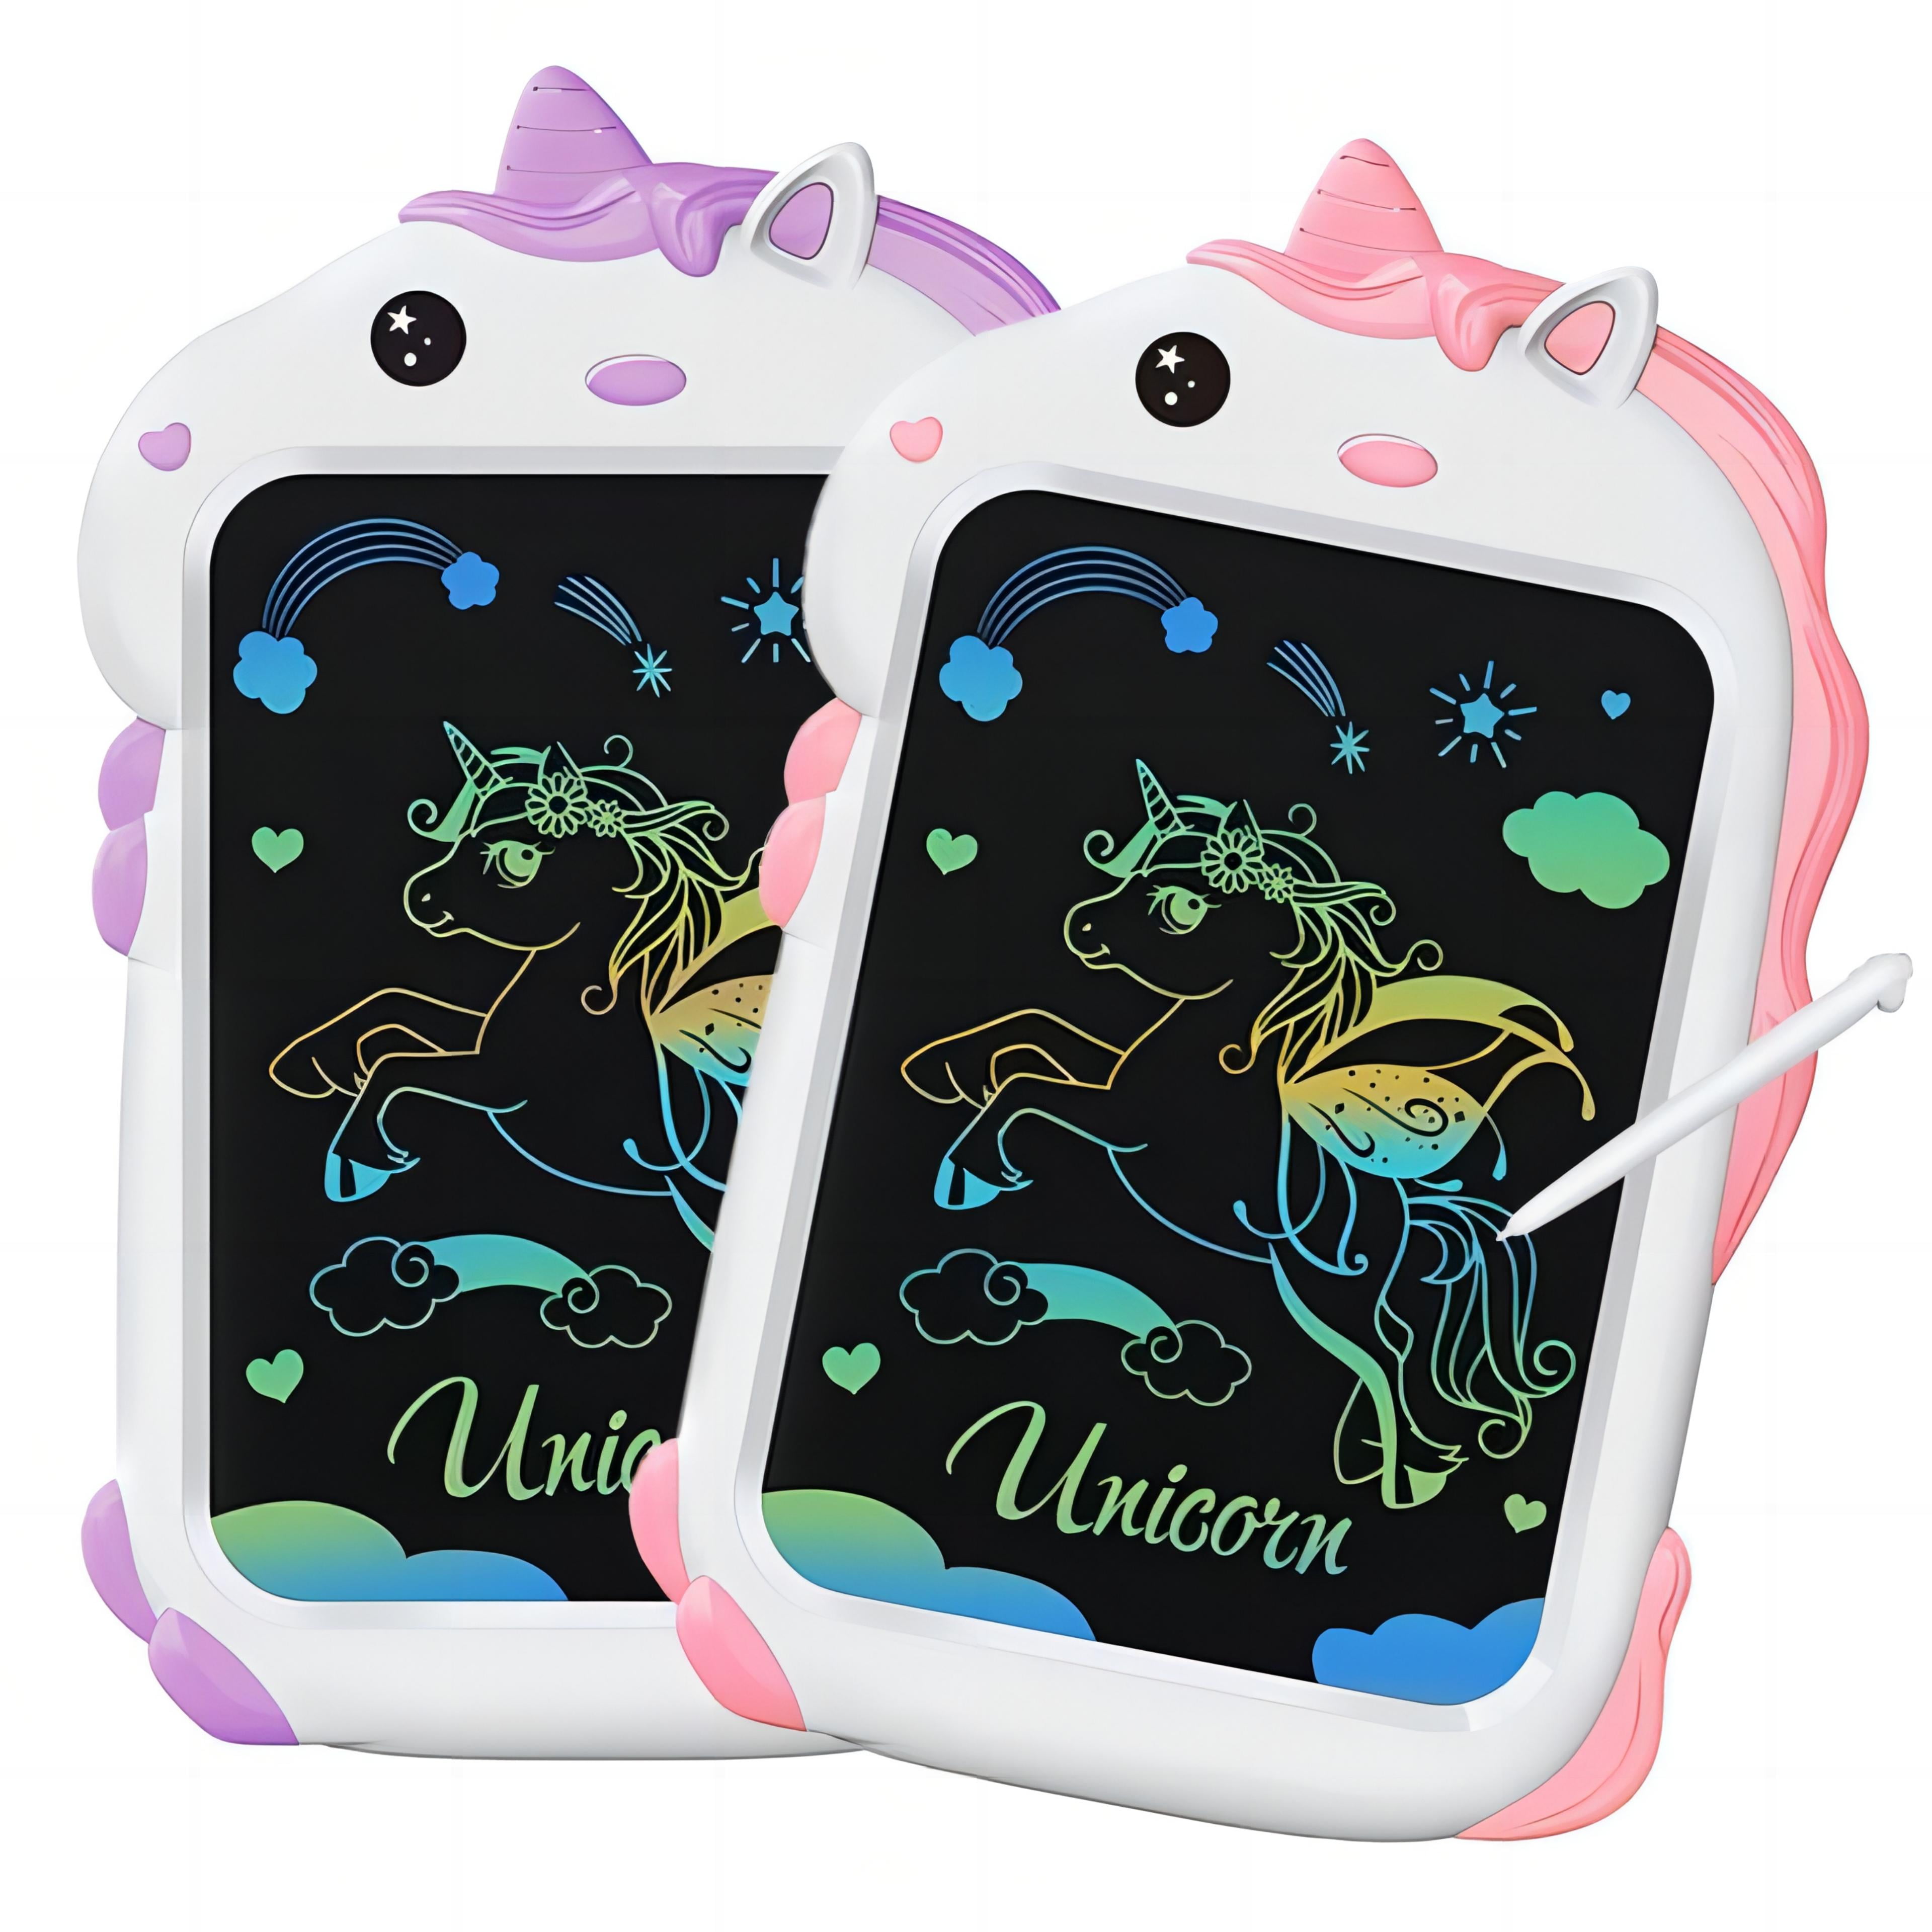 Unicorn LCD Writing Tablet Girls Toys, 8.5” Colorful Doodle